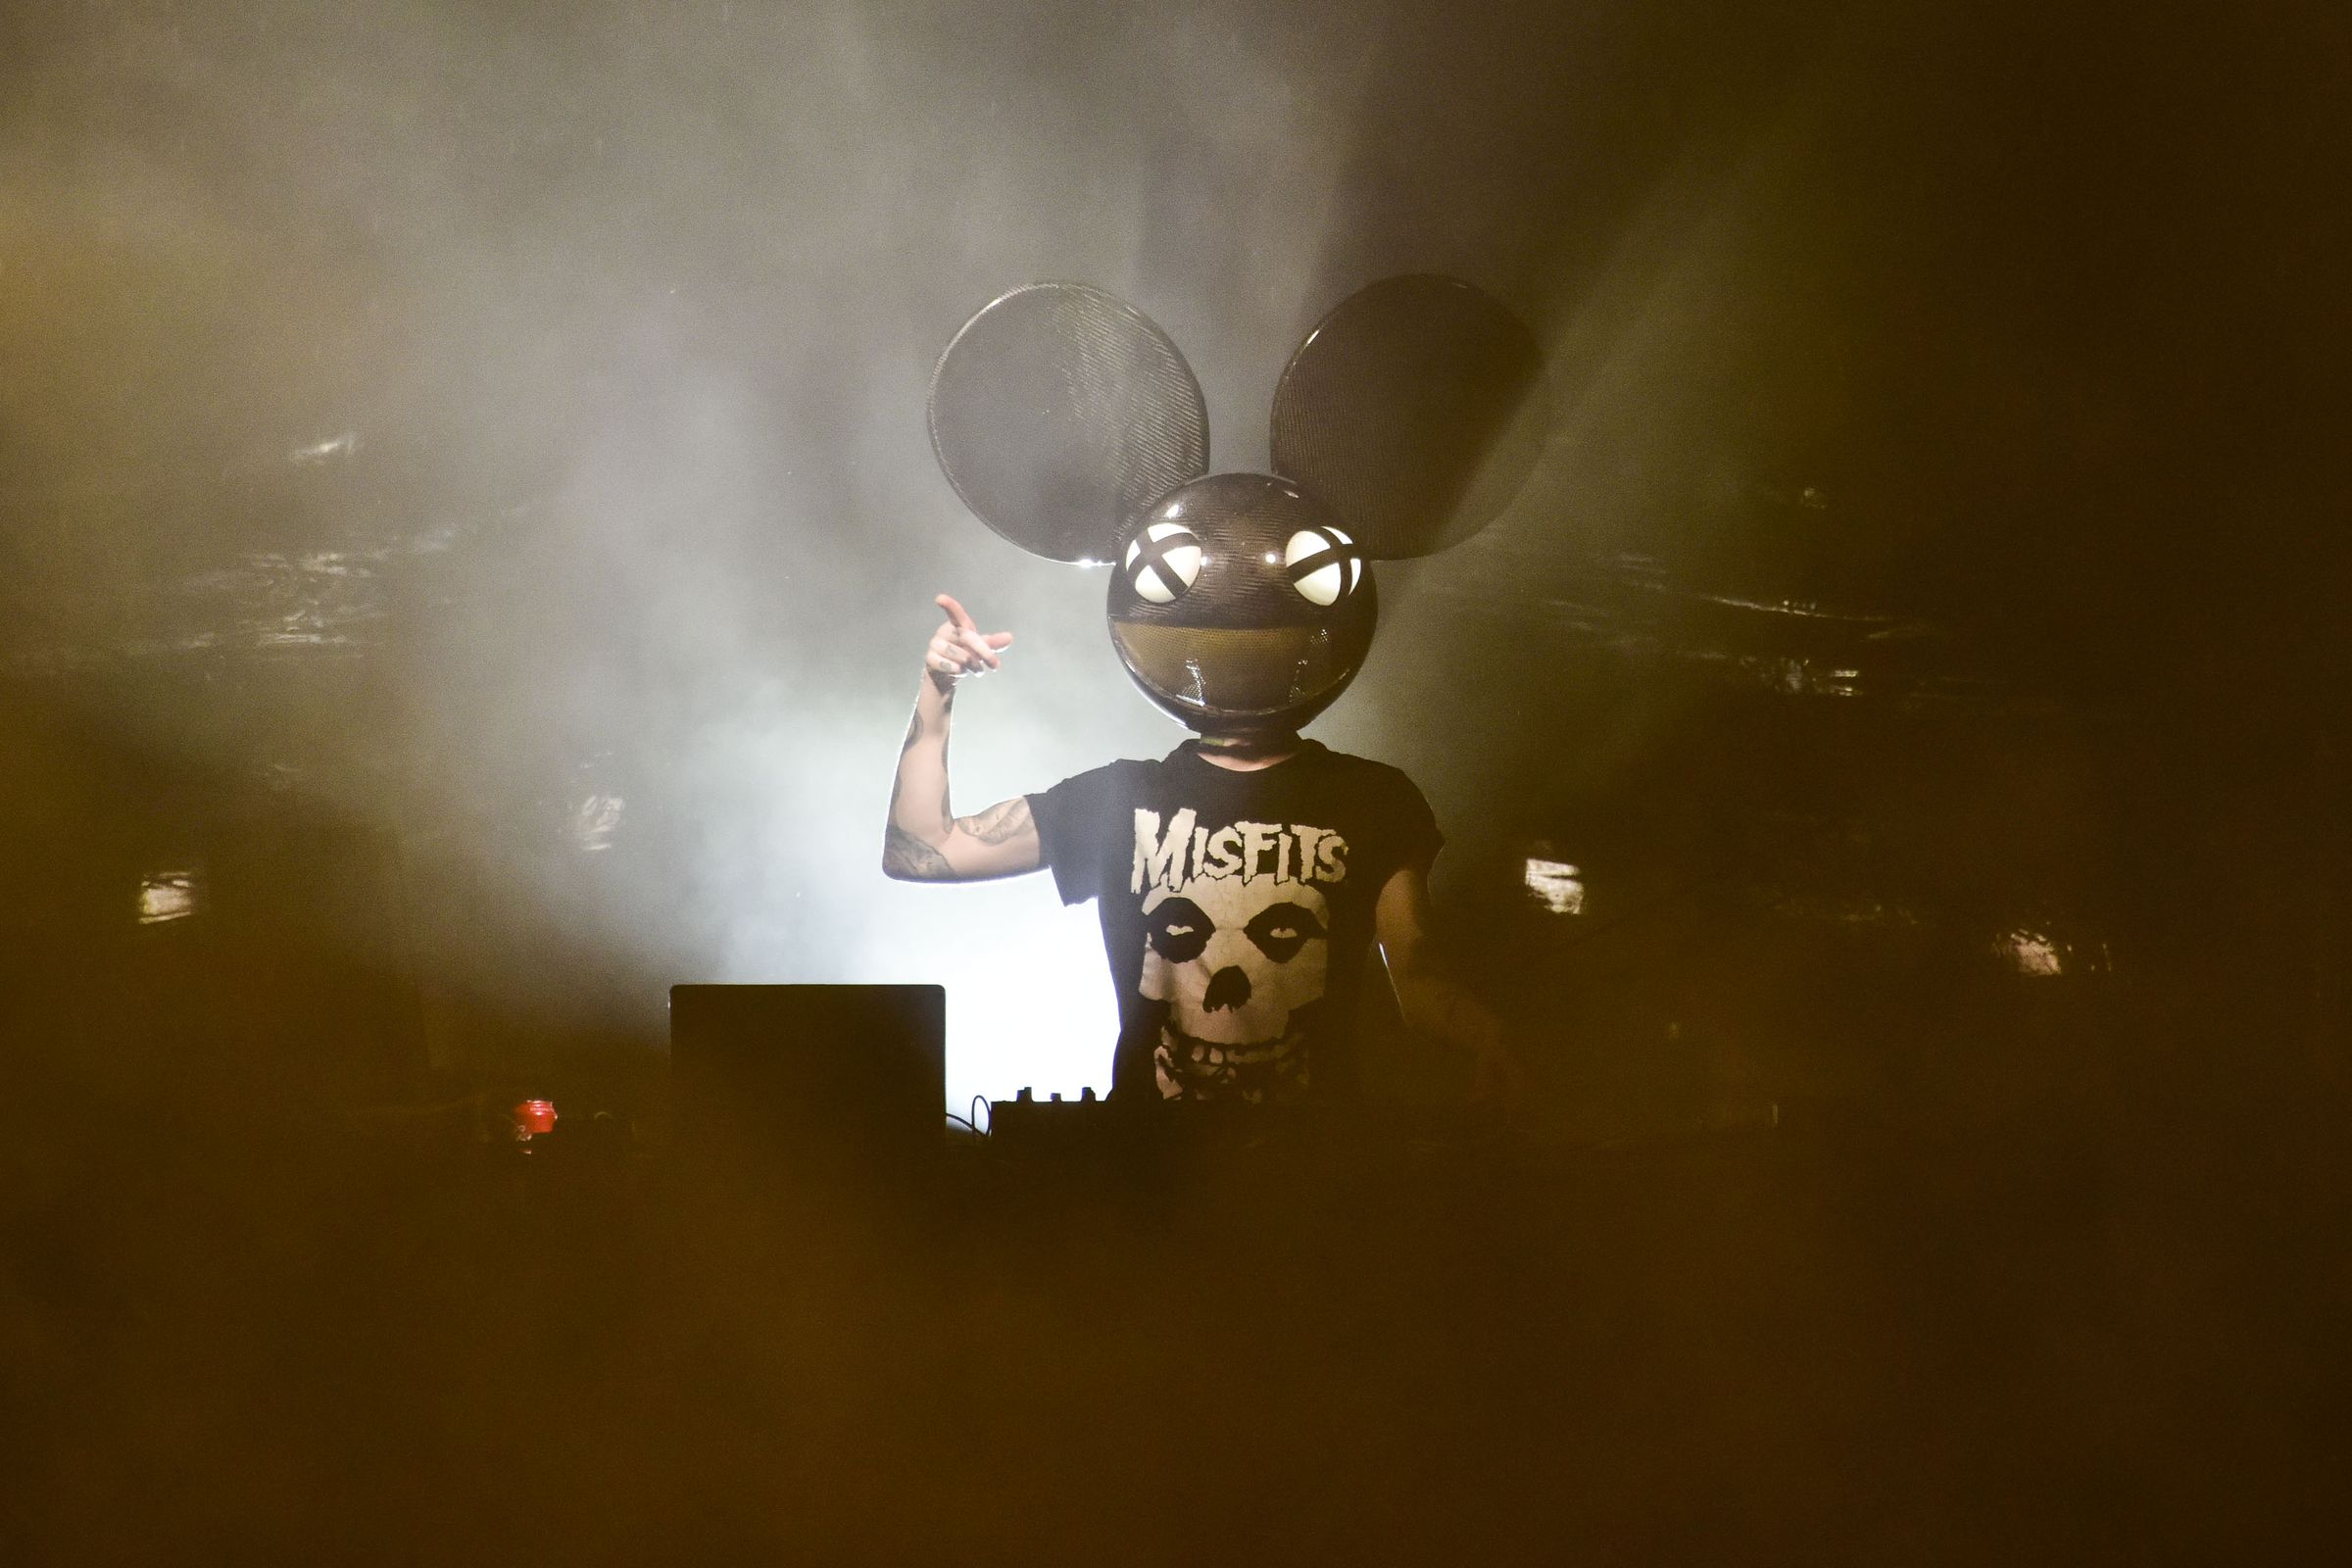 deadmau5 Performs At The Rooftop At Pier 17 In The Seaport District NYC